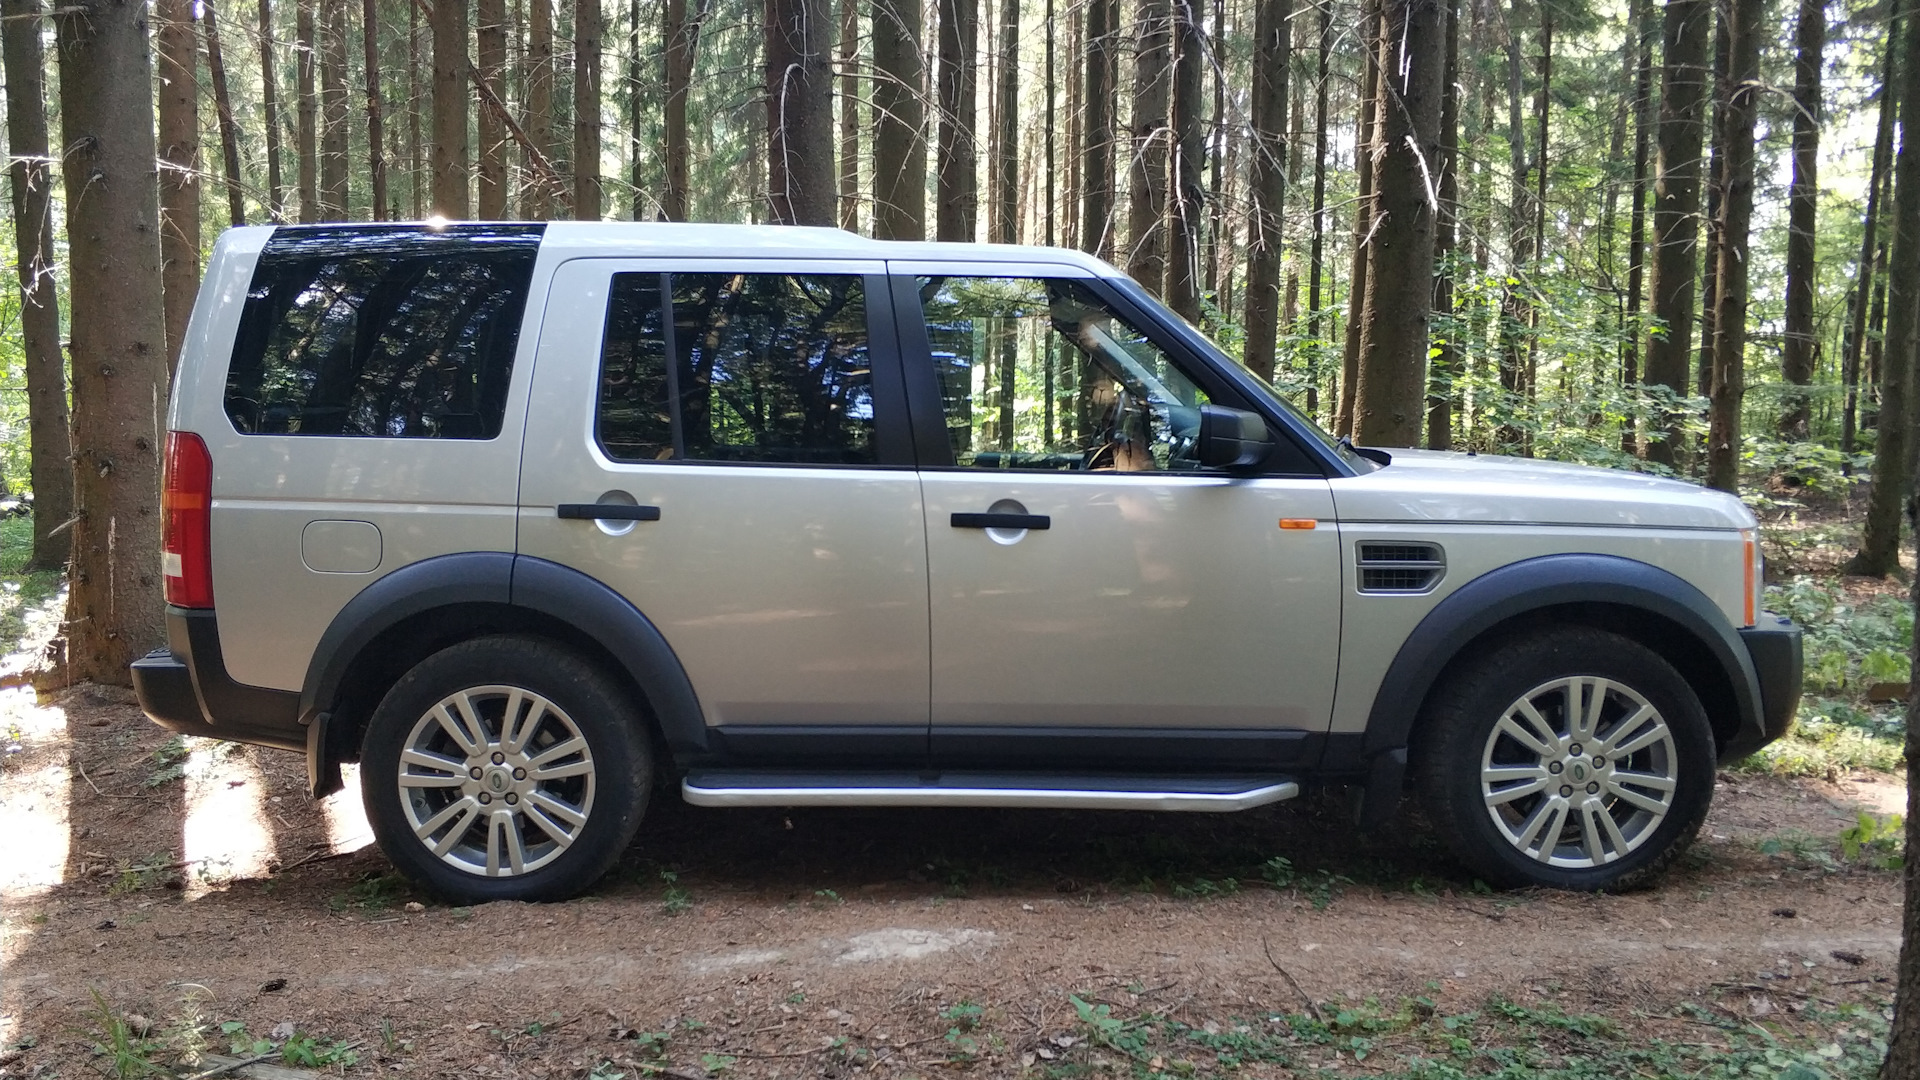 Дискавери 2007. Land Rover Discovery 2007. Discovery 3. БЦ Дискавери 3 2.7 дизель. Тюнинг Дискавери 3 2.7 дизель.